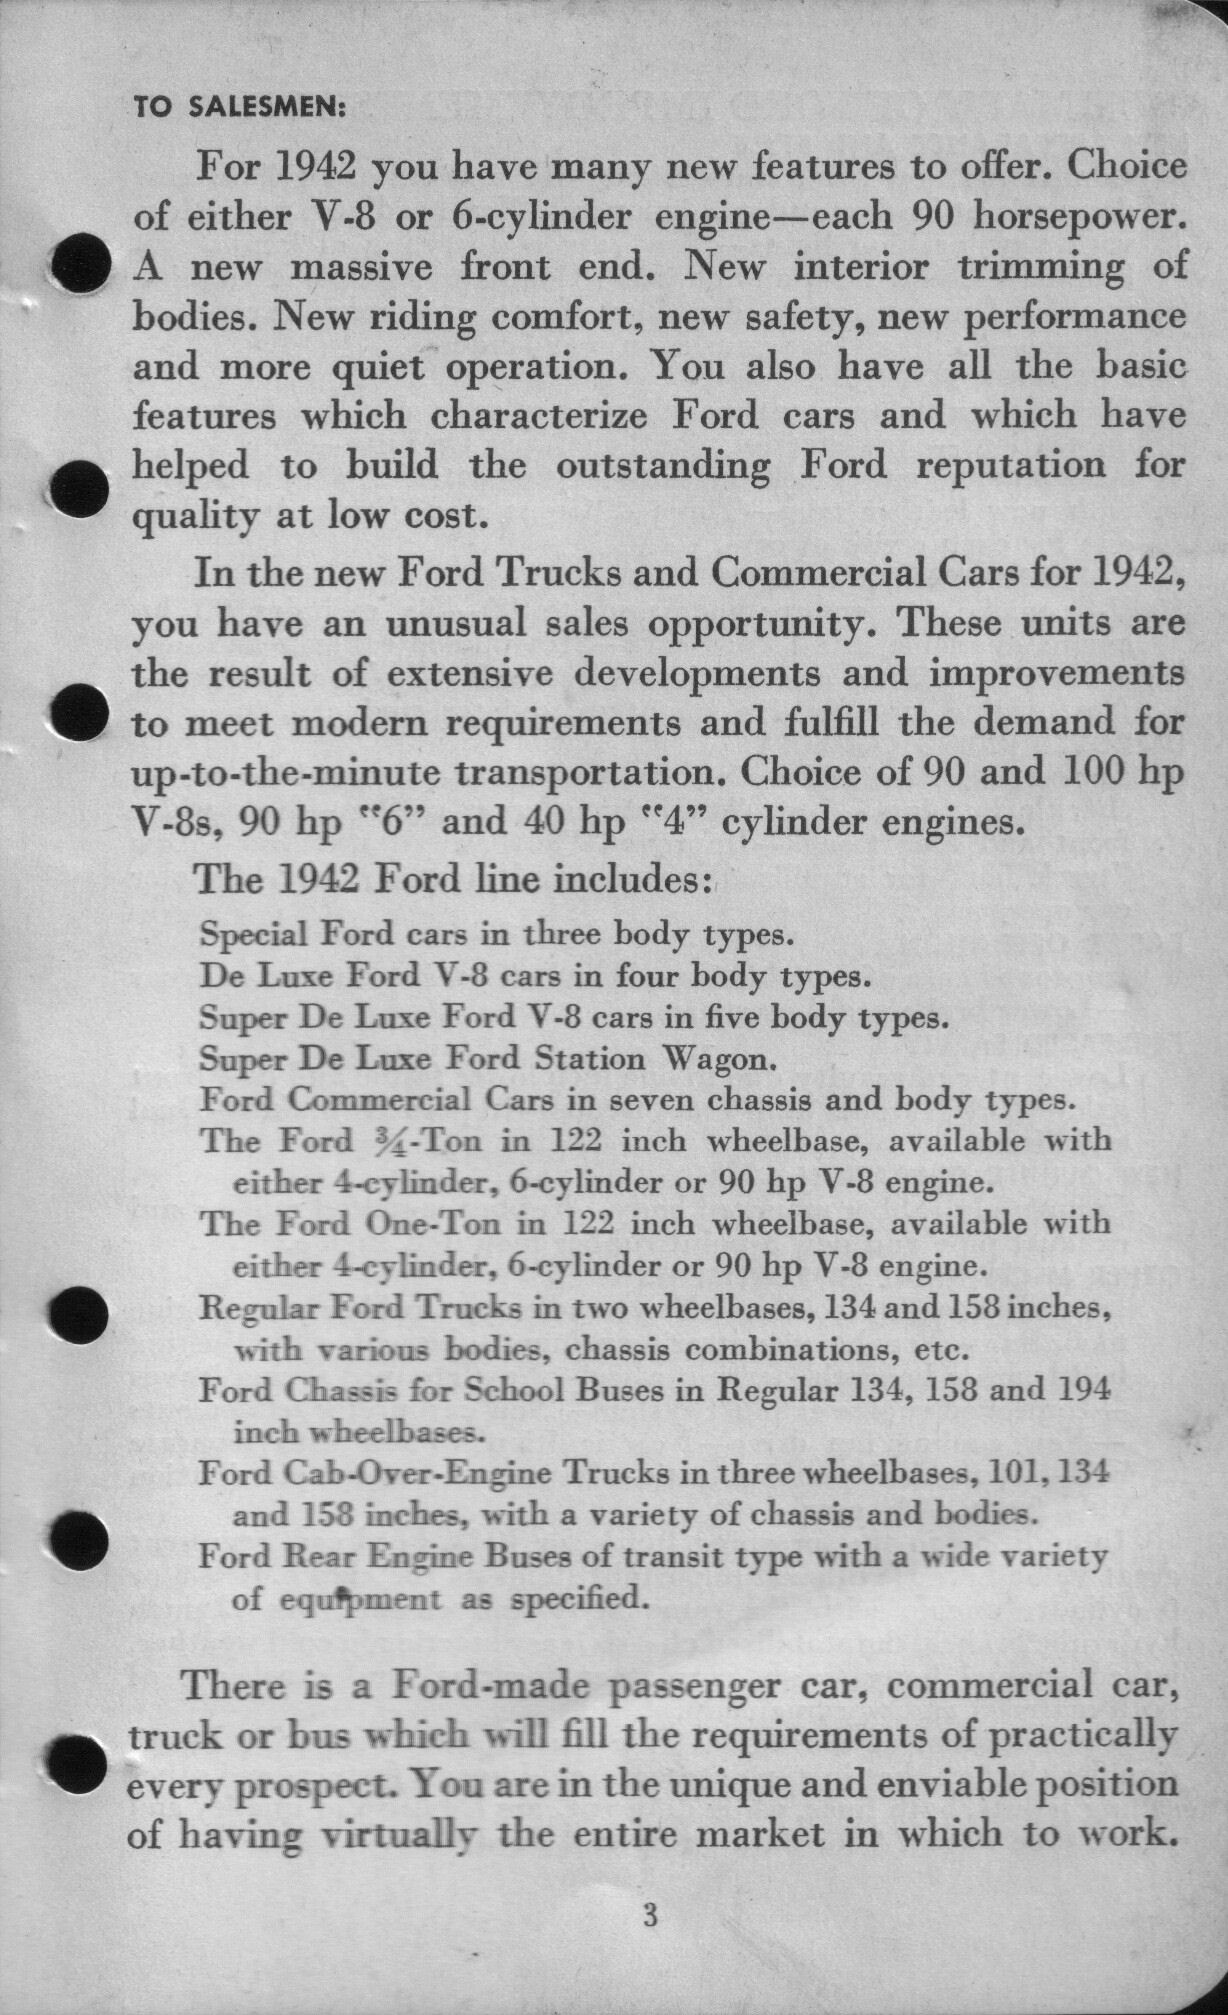 1942_Ford_Salesmans_Reference_Manual-003